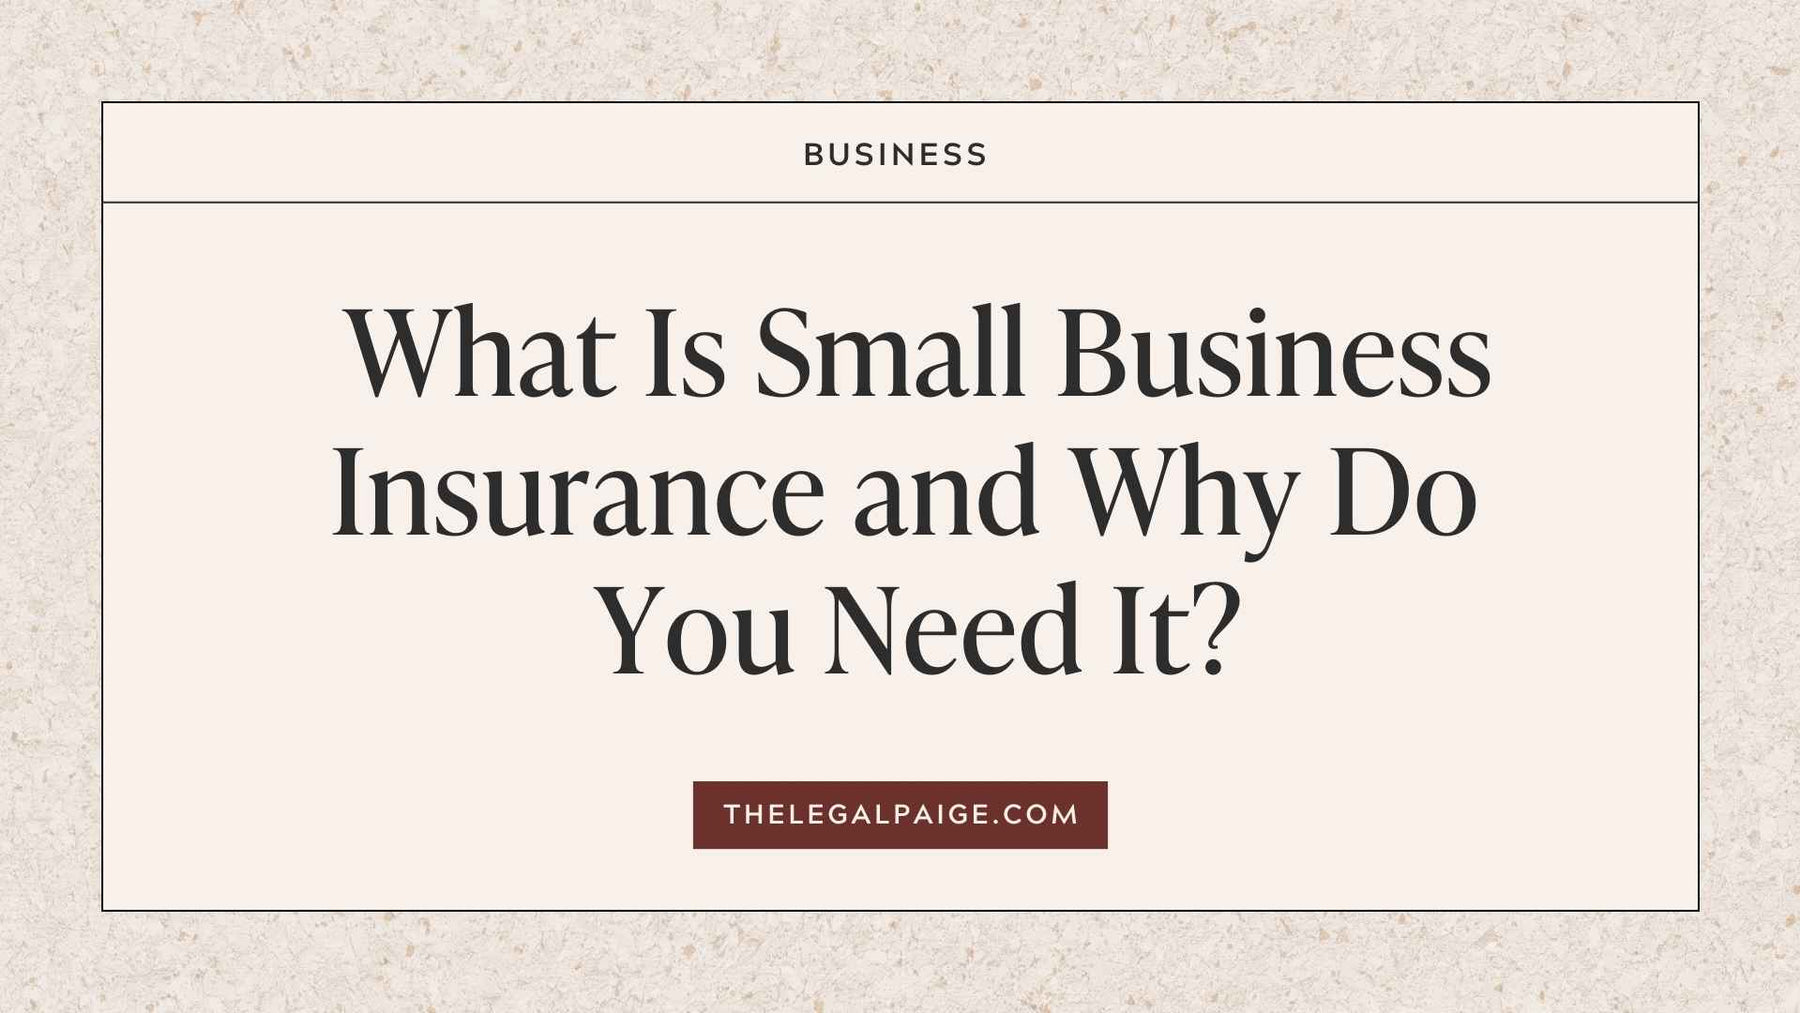 What Is Small Business Insurance and Why Do You Need It?